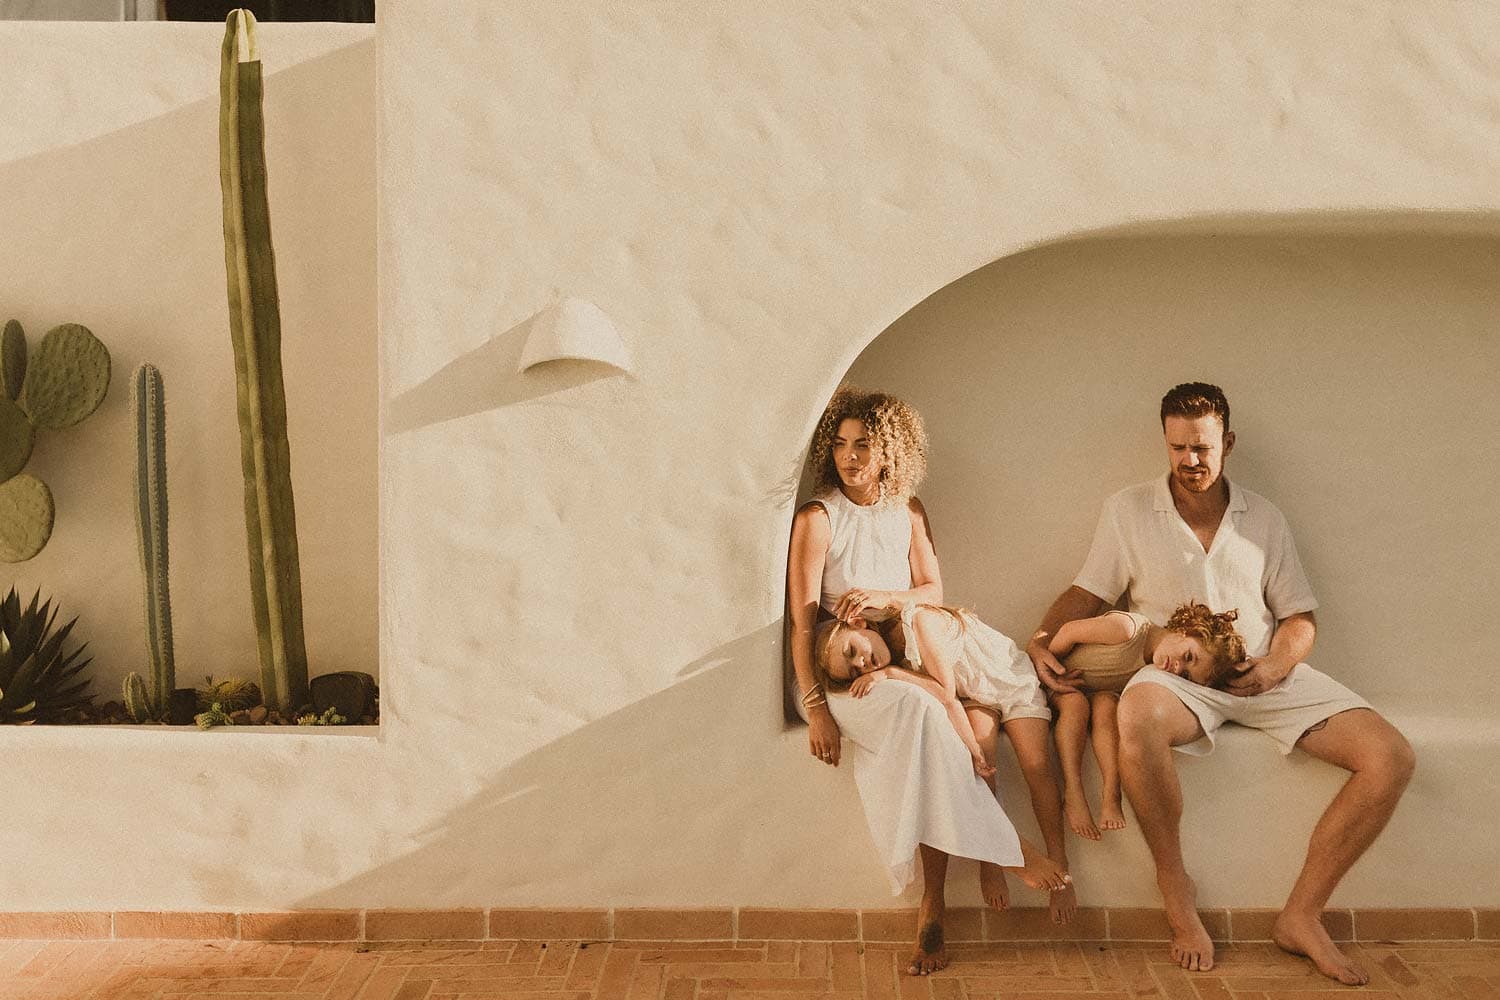 Sutherland-shire-family-photographer-mum-dad-and-young-children-dressed-in-neutrals-enjoy-the-dappled-afternoon-sun-in-very-european-inspired-nook-of-their-home-with-an-artsy-cactus-garden-beside-them